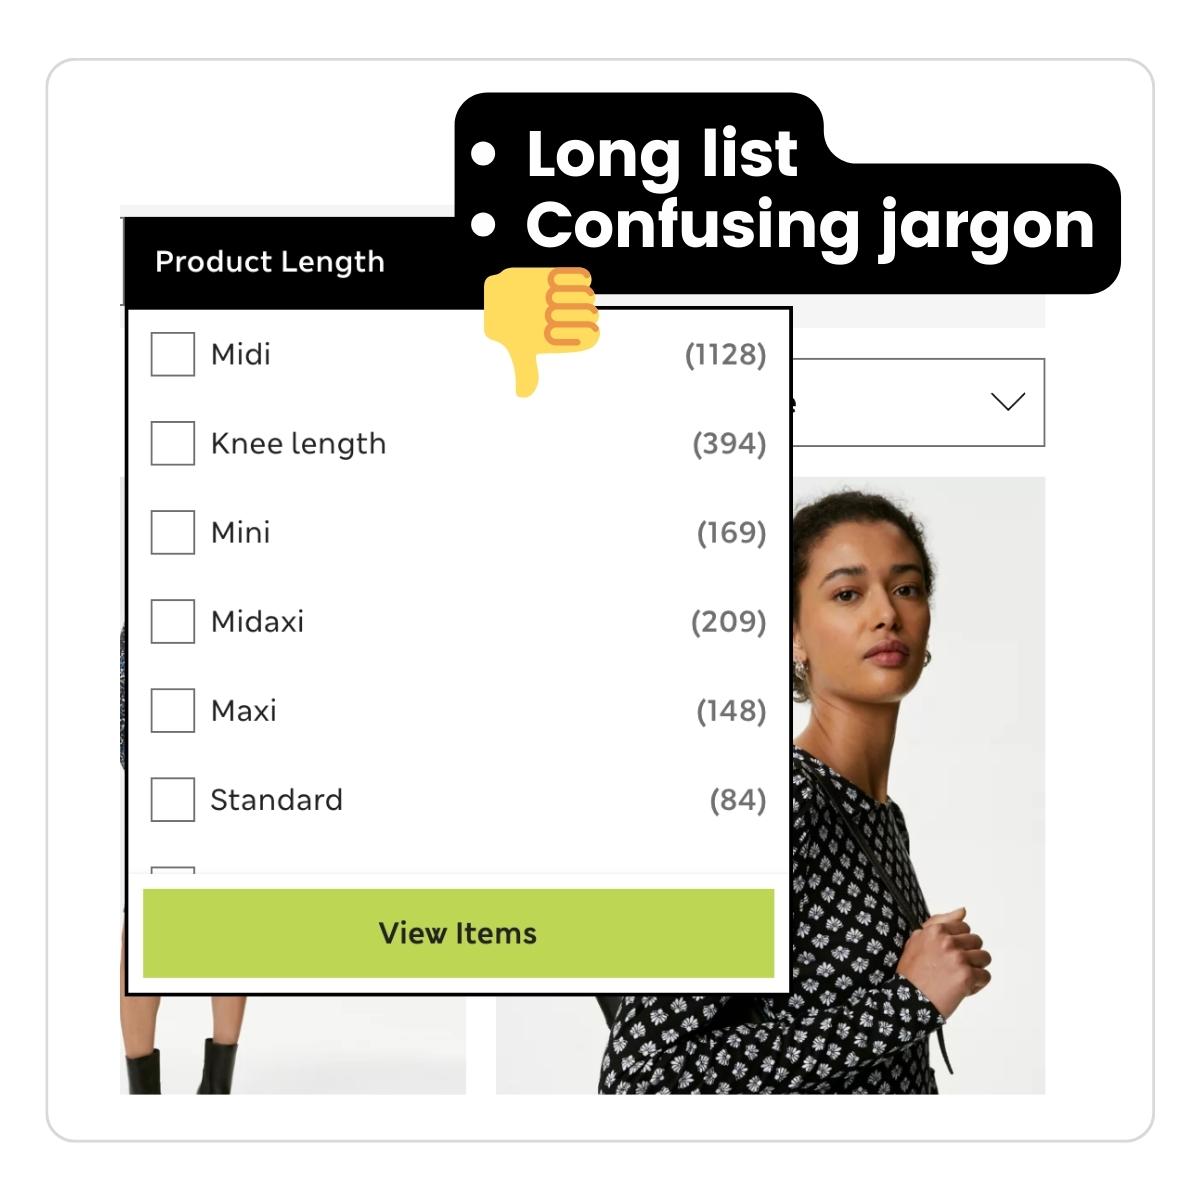 Long list of confusing fashion jargon in traditional product filters